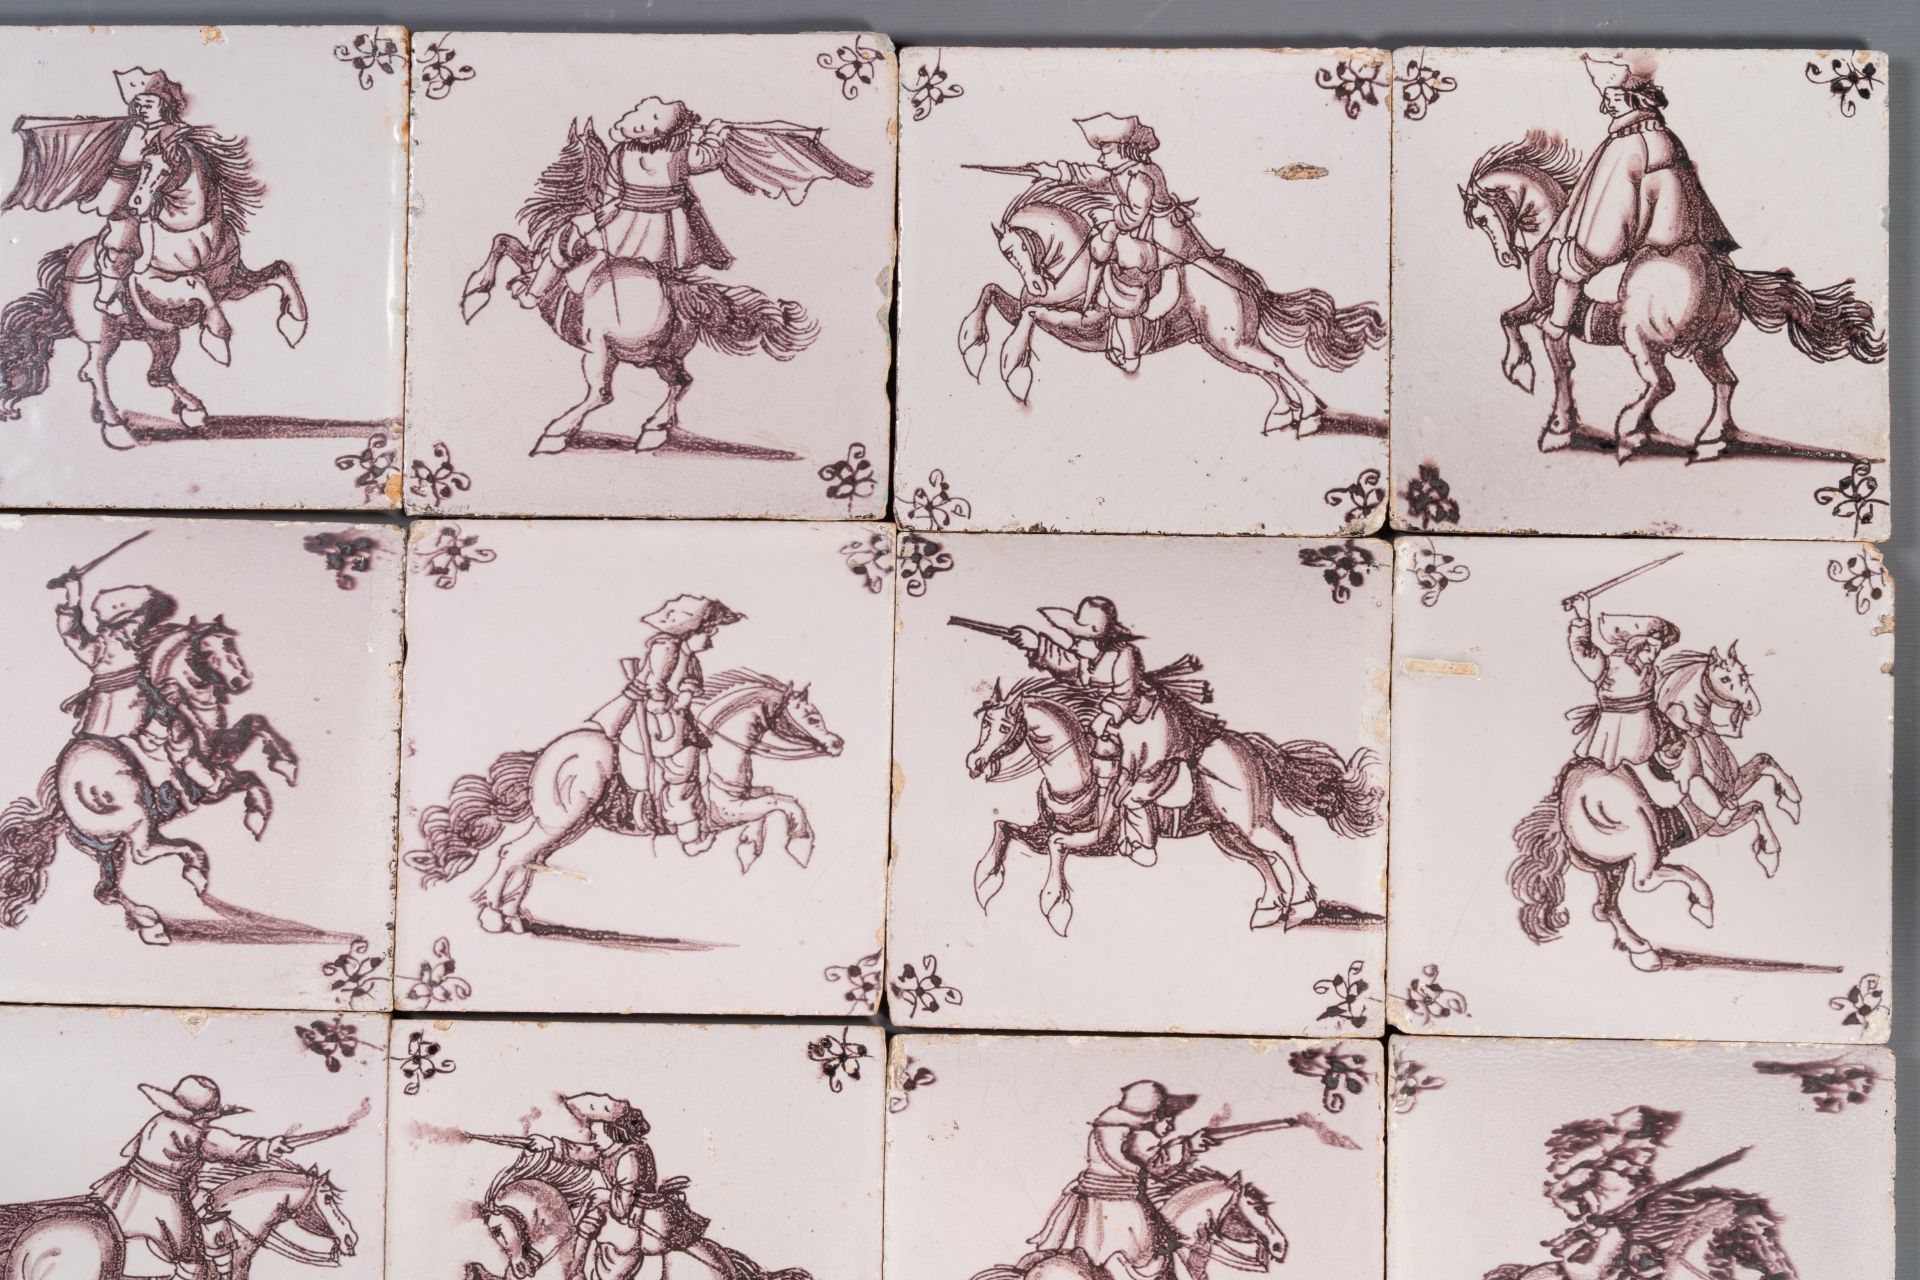 Fifteen Dutch Delft manganese tiles with horse riders, late 17th C. - Image 5 of 13